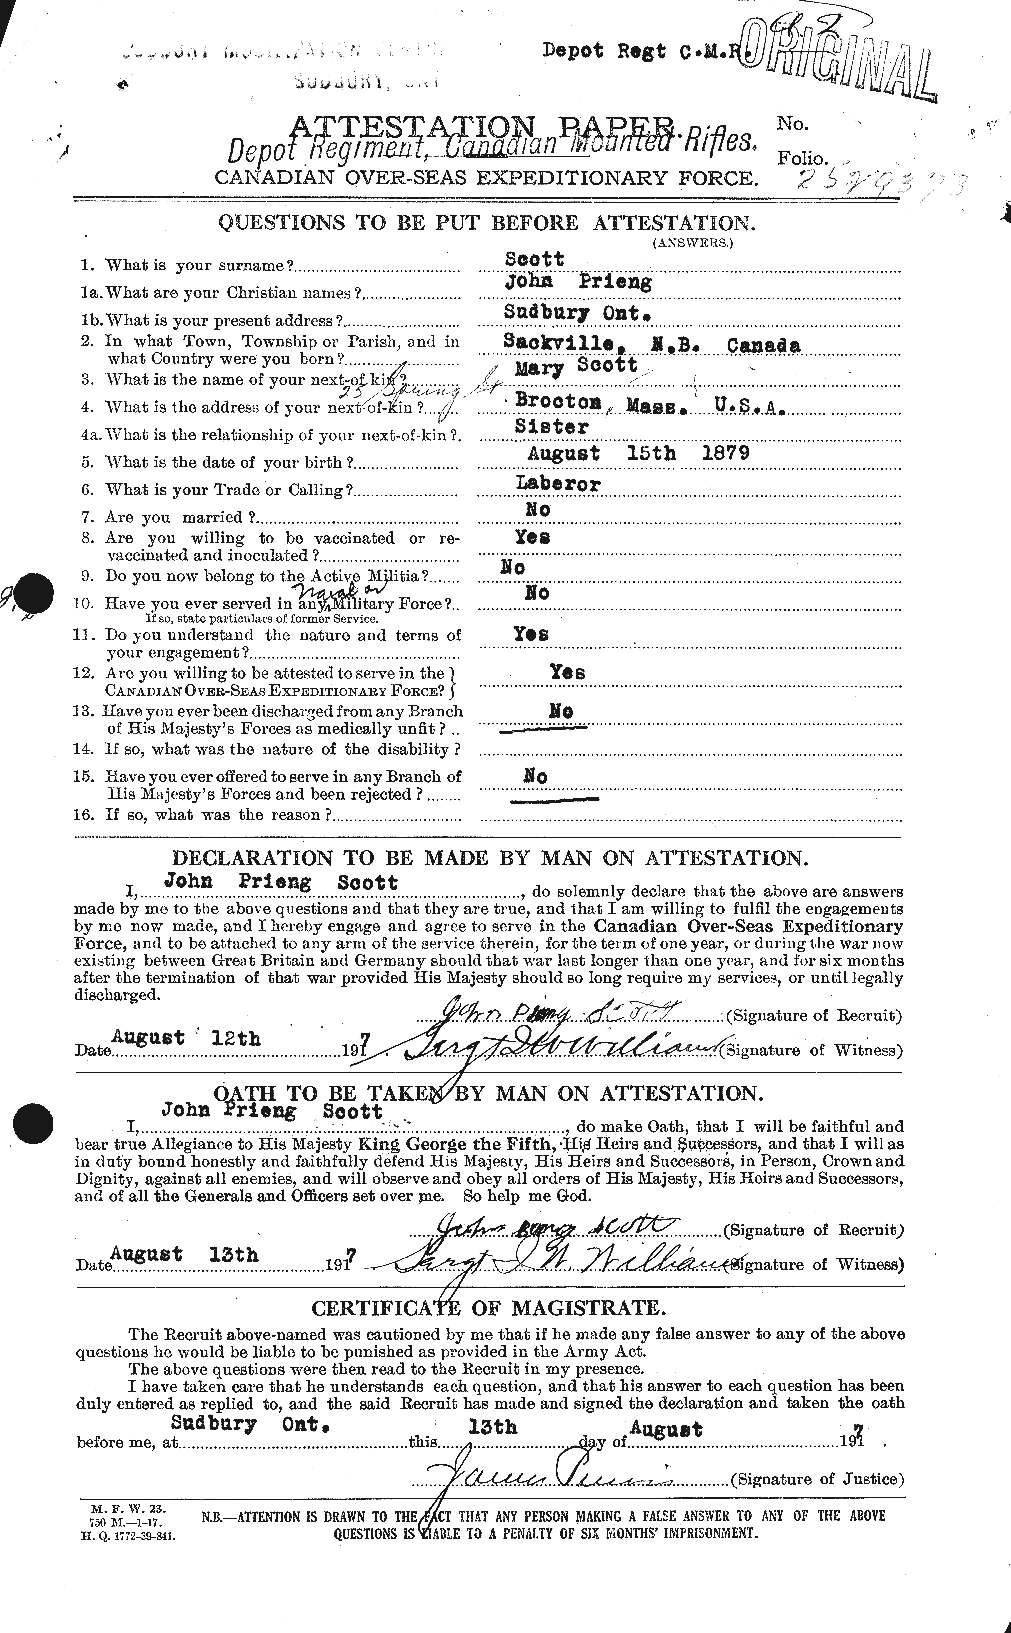 Personnel Records of the First World War - CEF 084437a